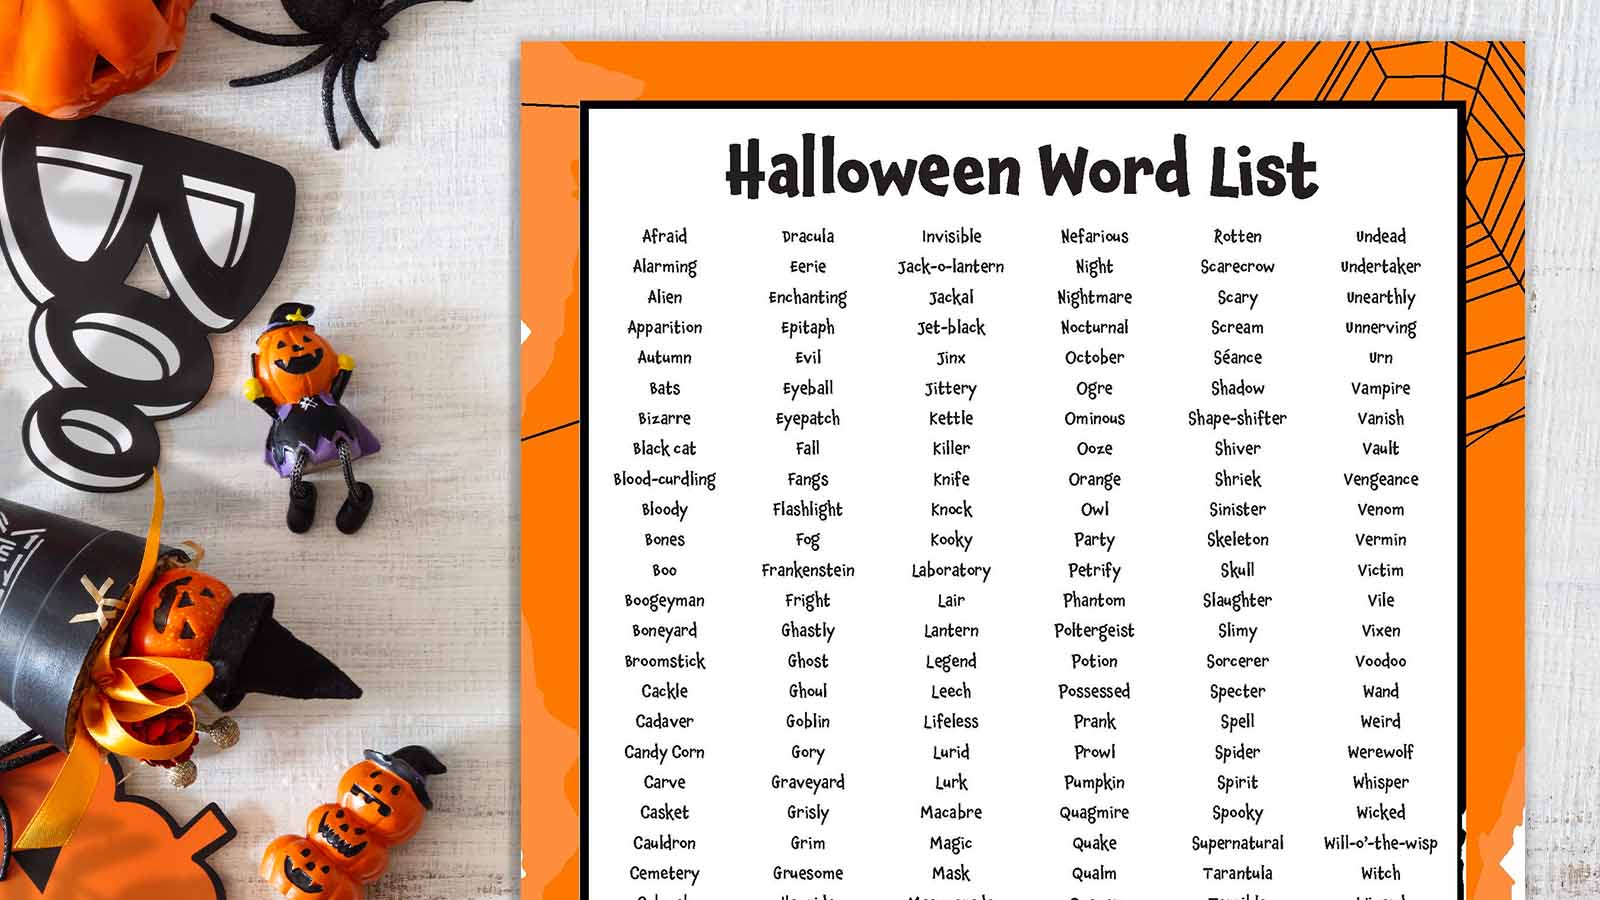 Printable Halloween word list on with Halloween decorations scattered beside it.